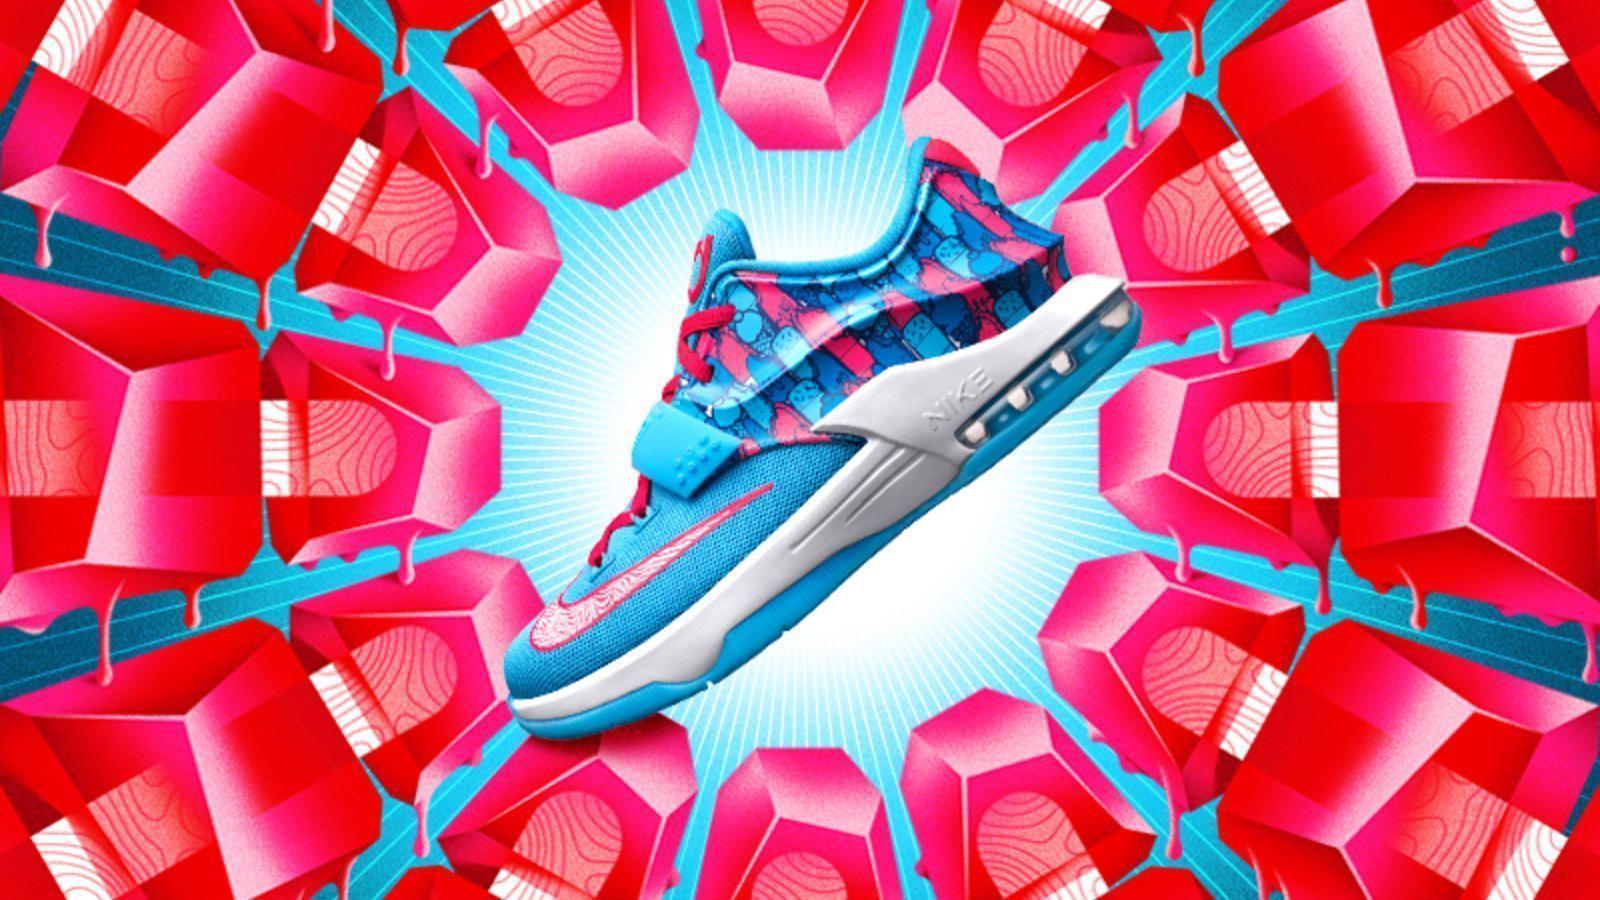 Nike News&; With KD: The KD7 Frozens Shoe Arrives Just